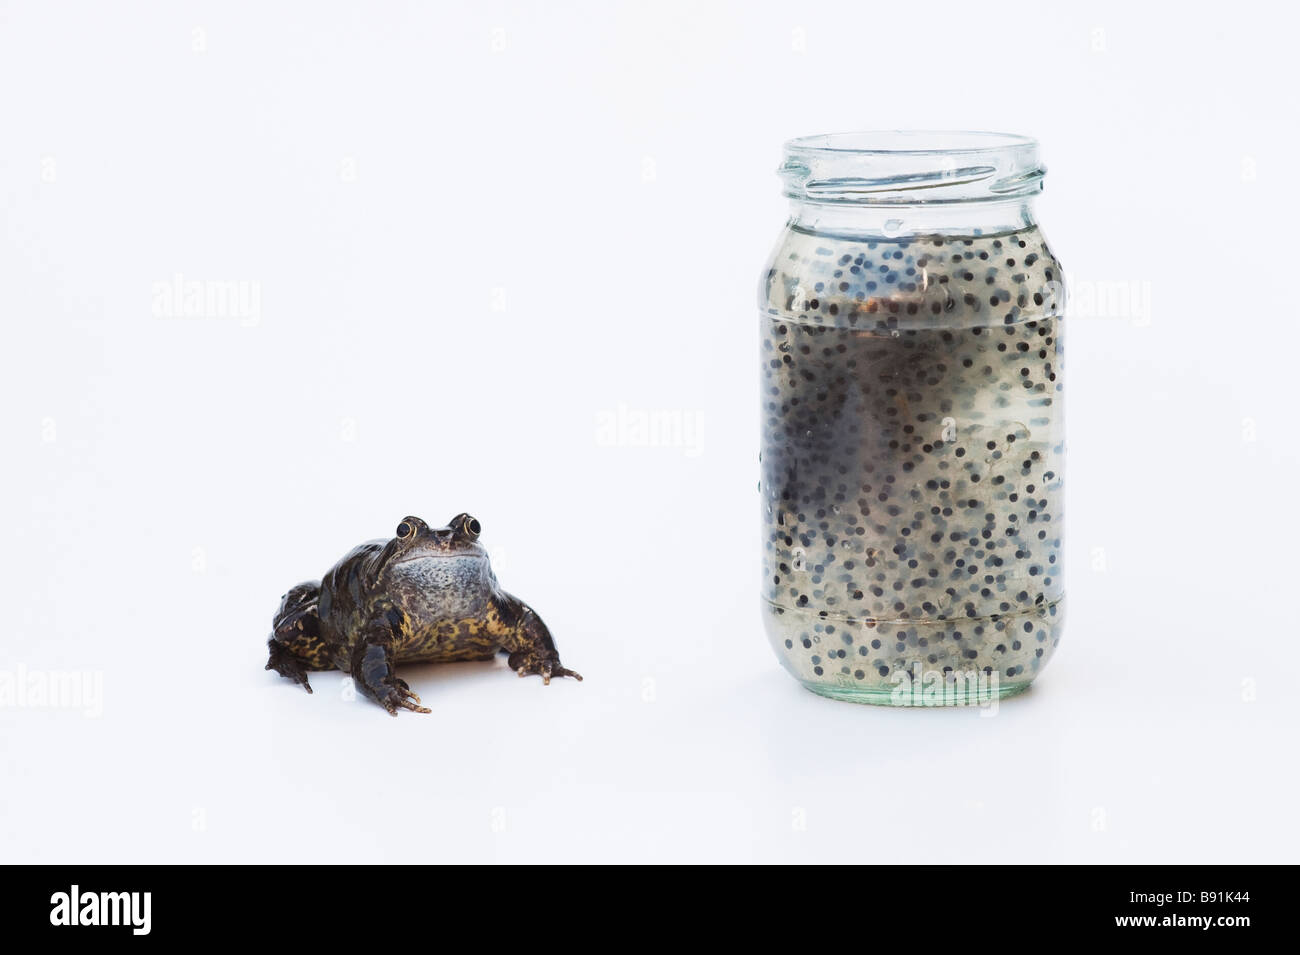 Rana temporaria. Single common frog and jar of frog spawn against a white background Stock Photo